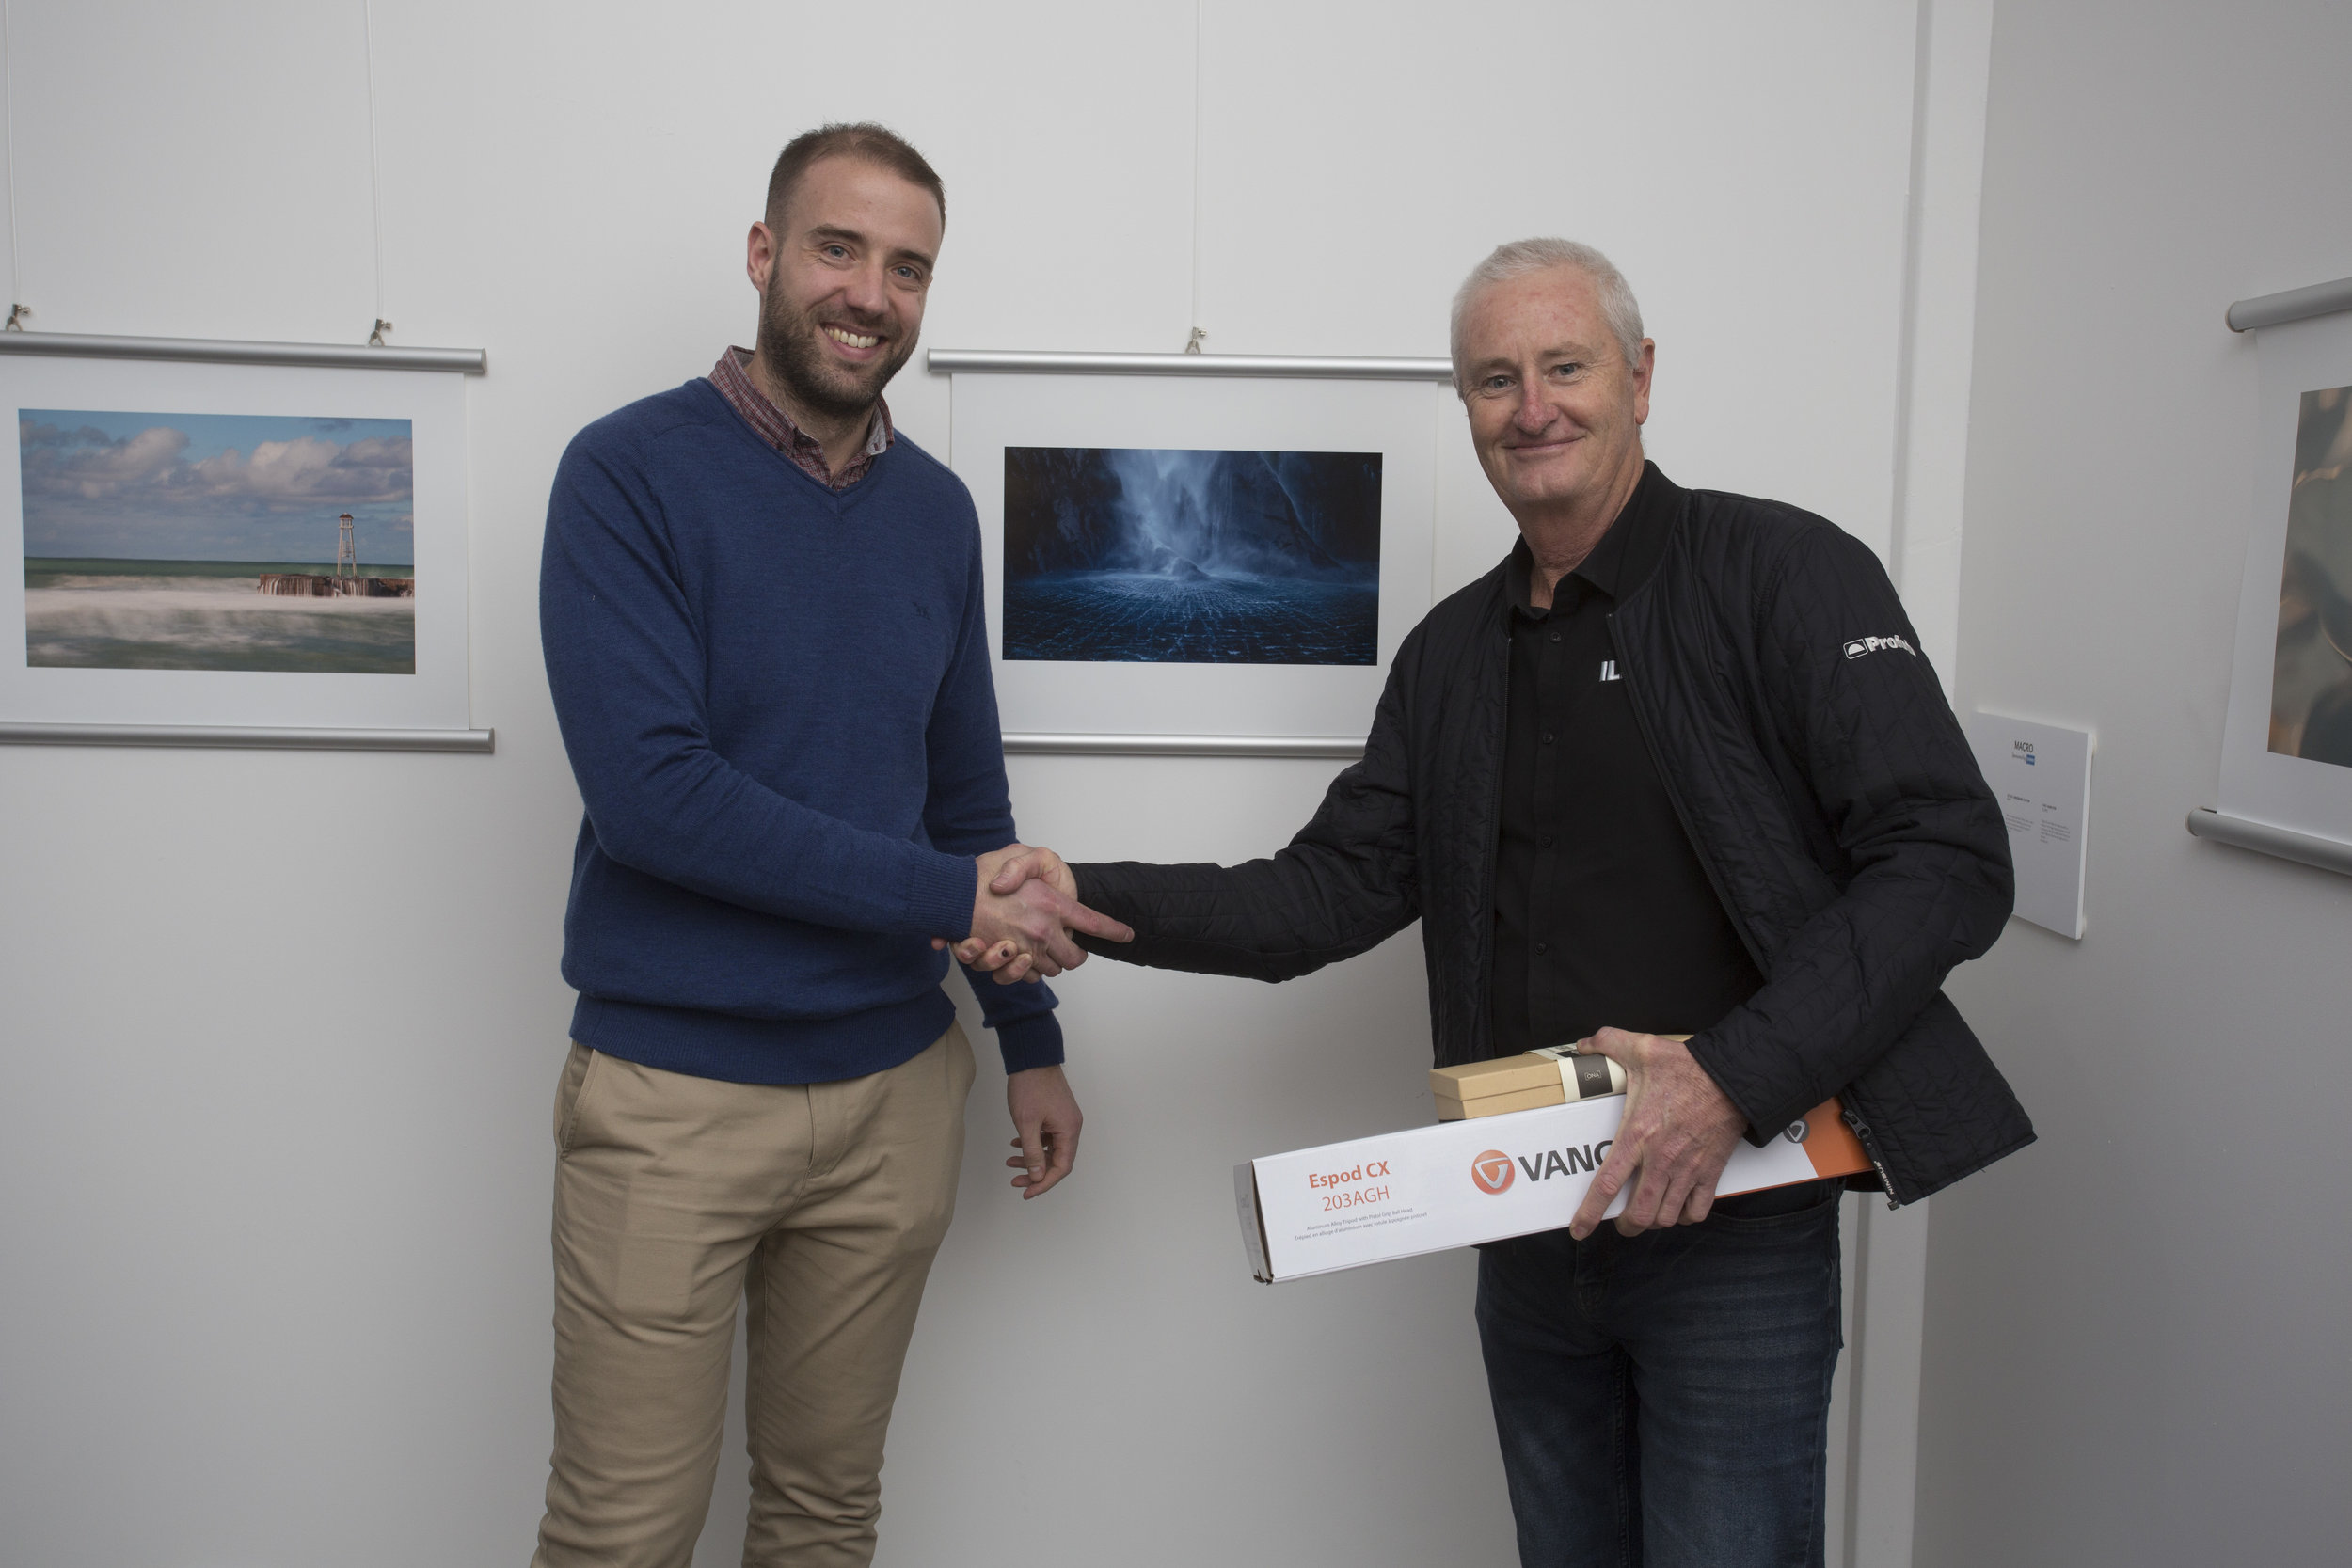  Stephen Milner, third-place Landscape photographer, with Mark Ward of Sigma/CRK 